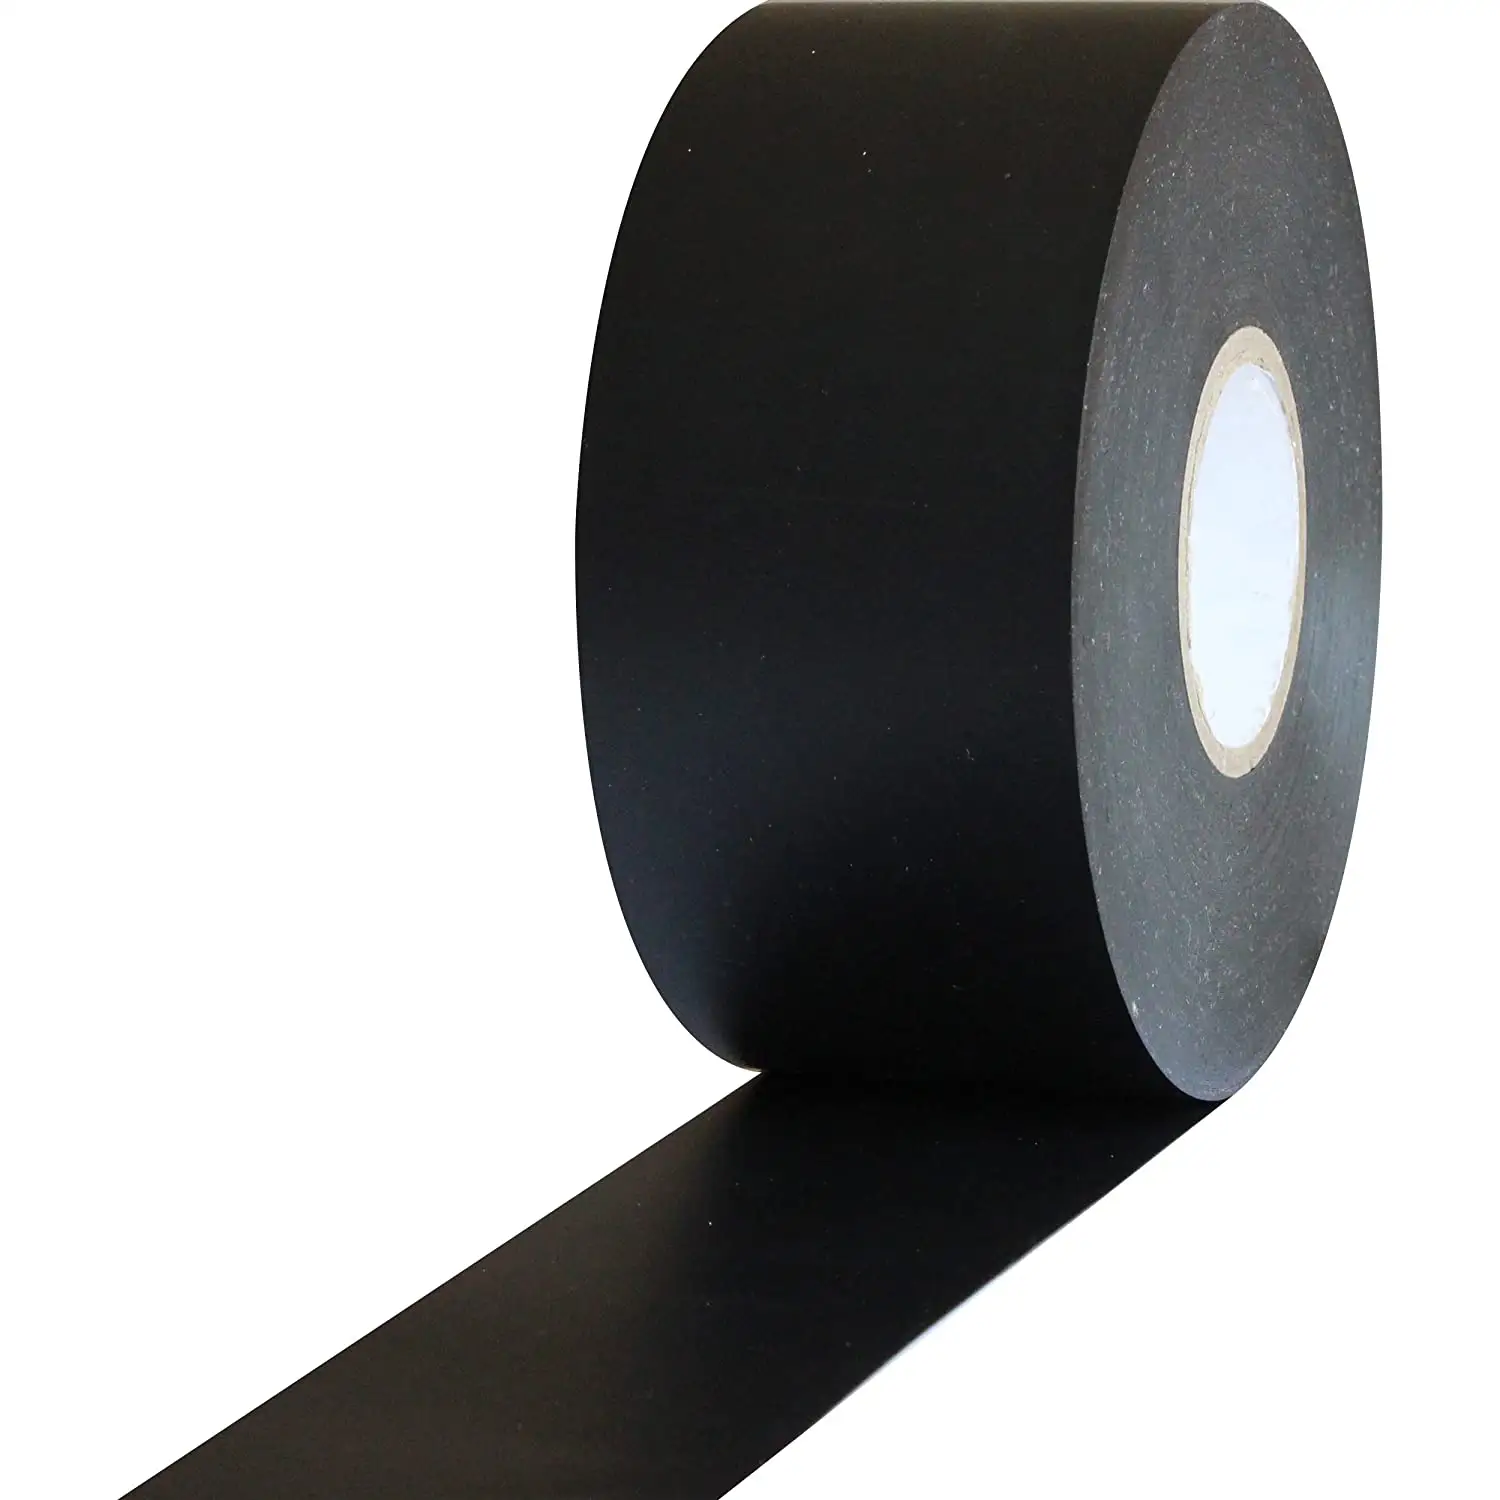 Wholesale Vinyl Electrical Insulation insulating adhesive Tape for wires repair